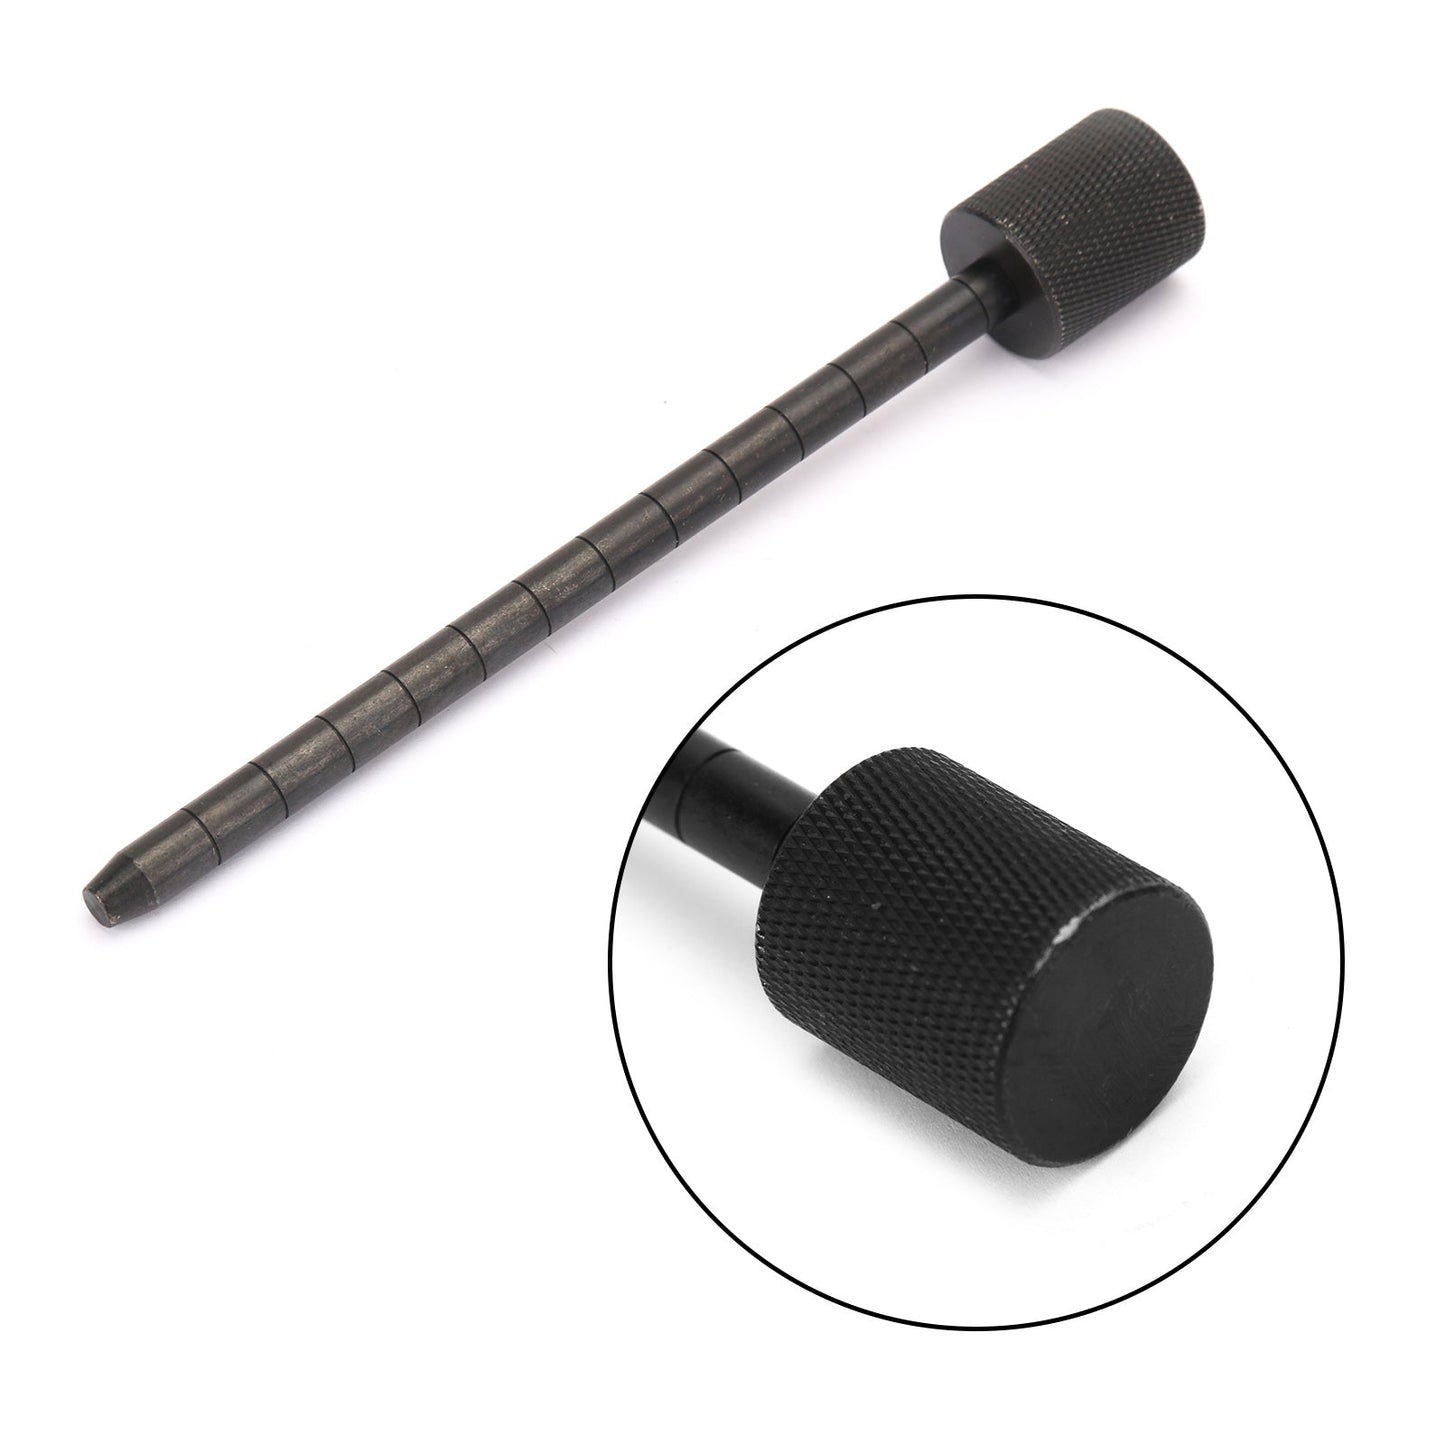 1017 Transmission Dipstick Tool For Chrysler 6F24 Automatic Trans 10323A